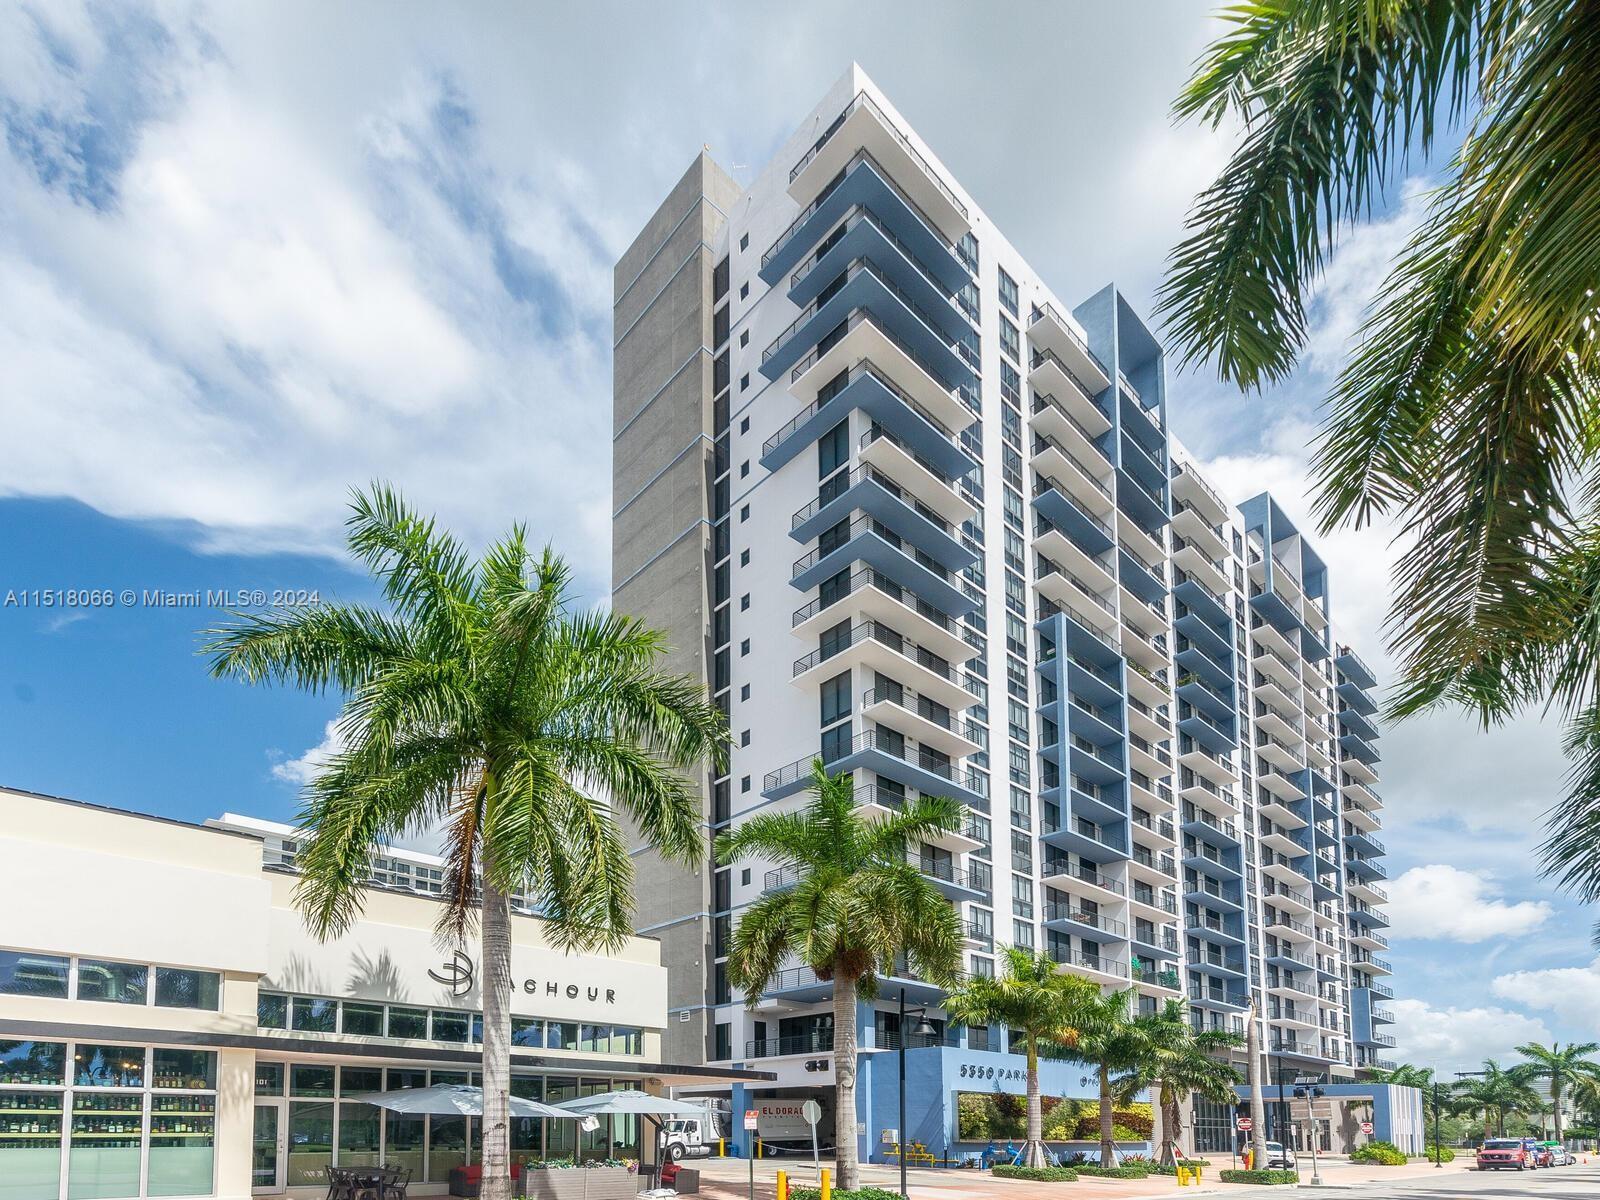 Welcome 2/2 condo in the heart of  Downtown Doral!!! Features appliances, granite countertops, tile flooring through, full size W/D in the unit. An independent entrance makes it possible to split unit into a 1/1 and 1/1 with full kitchen making this a great investment property since short term rentals are allowed. It's a win for either long term rental or short term. It's centrally located near shopping centers, restaurants, supermarkets, A rated schools and anything else you could possible need. Building offers  amenities such as,  gym party room, kids play room, 24 concierge and valet parking. it includes hurricane-resistant windows . The Wi-Fi, cable, and water are included in the HOA fee.